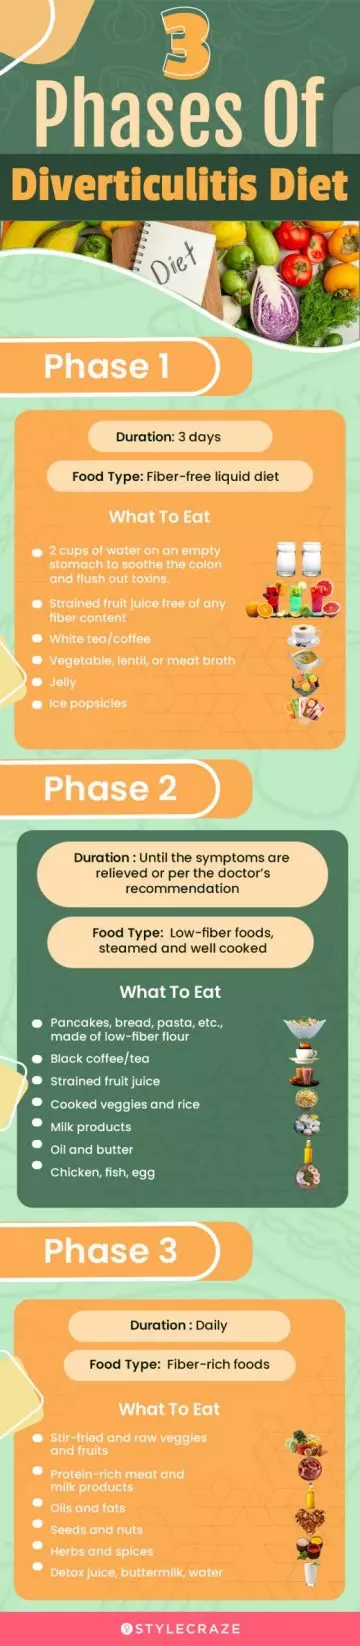 3 phases of diverticulitis diet (infographic)